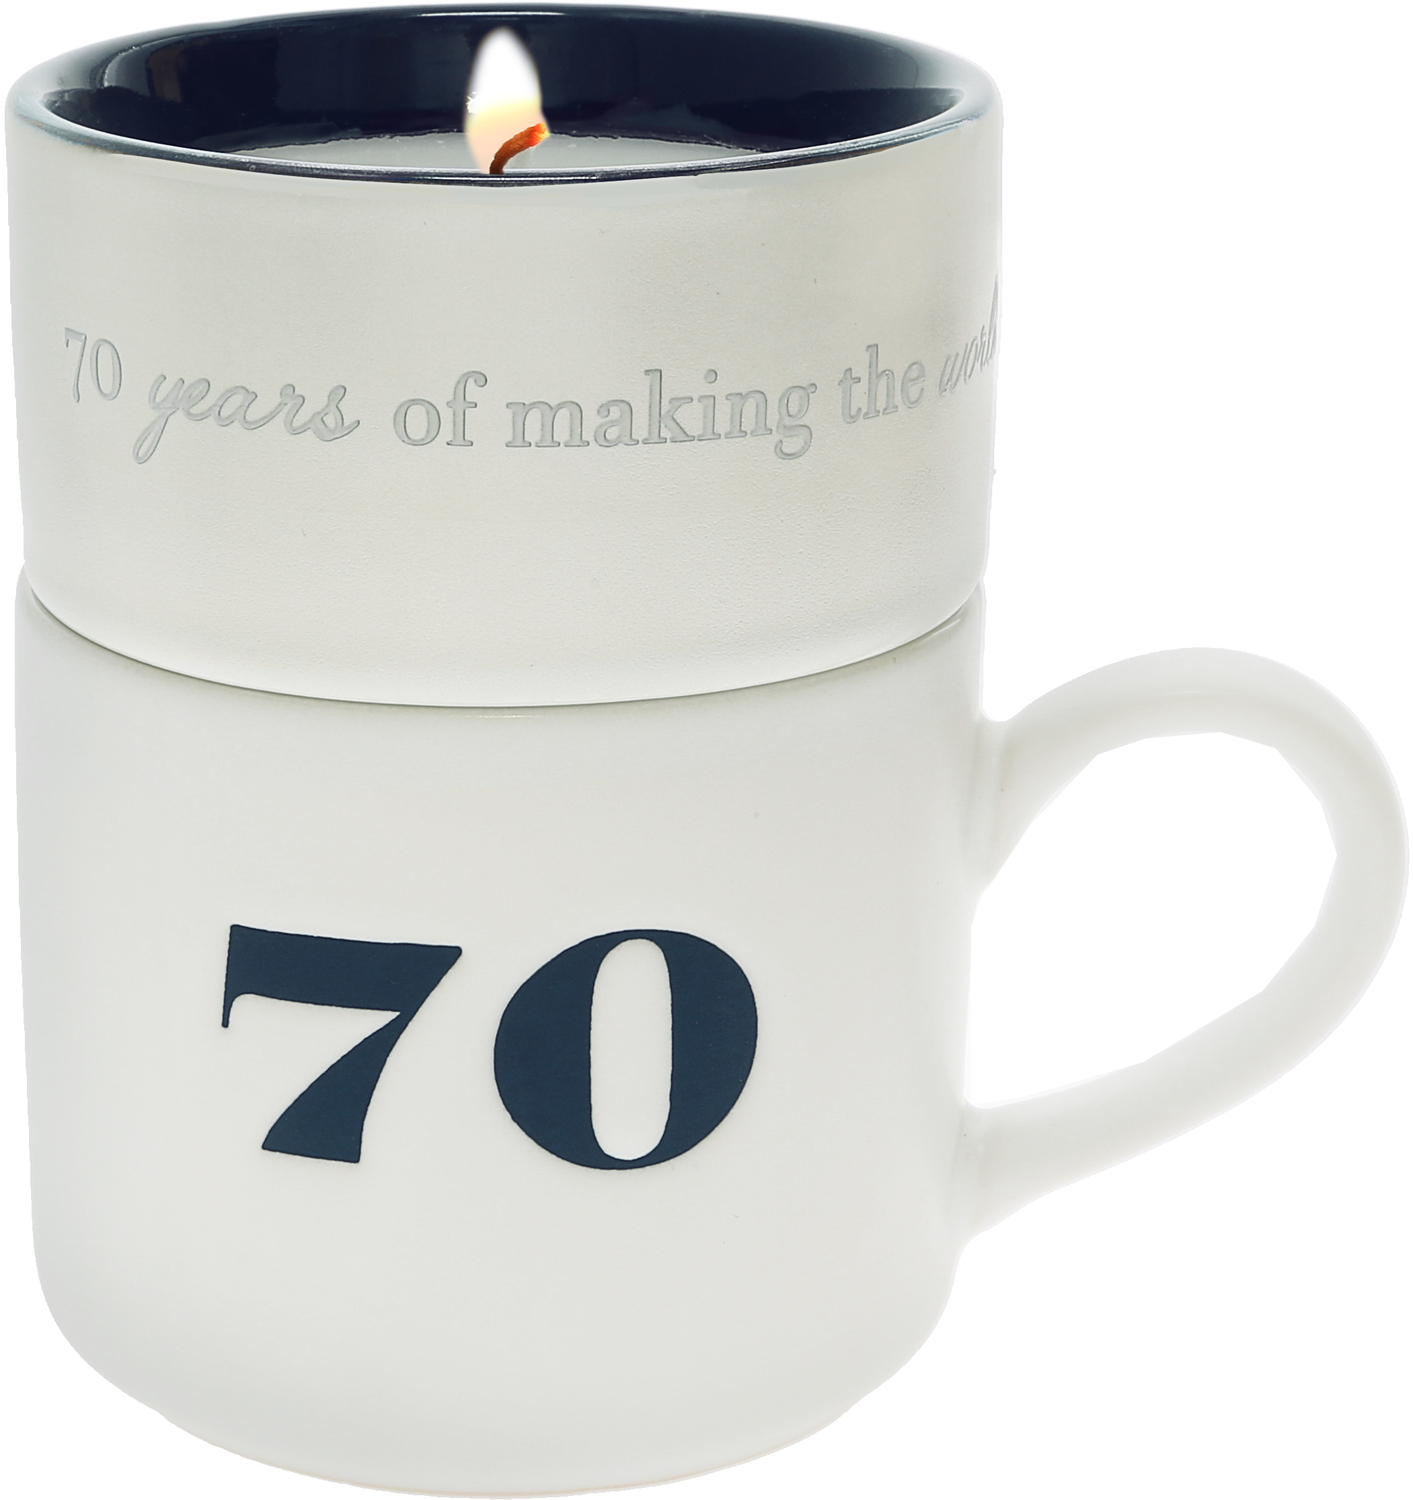 70 by Filled with Warmth - 70 - Stacking Mug and Candle Set
100% Soy Wax Scent: Tranquility